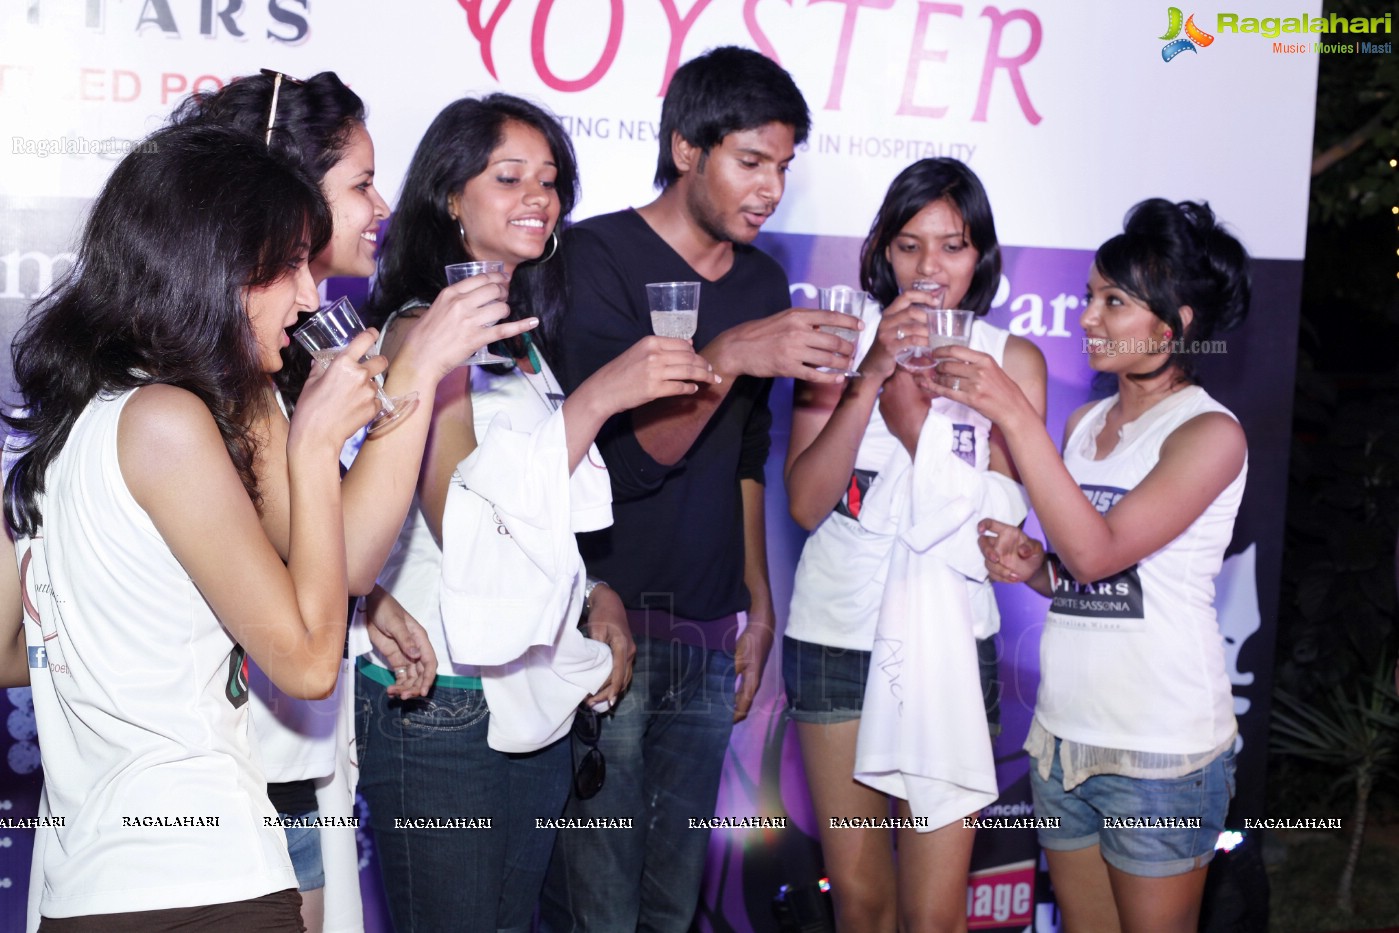 Success Celebration Party of Miss Hyderabad 2012 Beauties (Set 2)